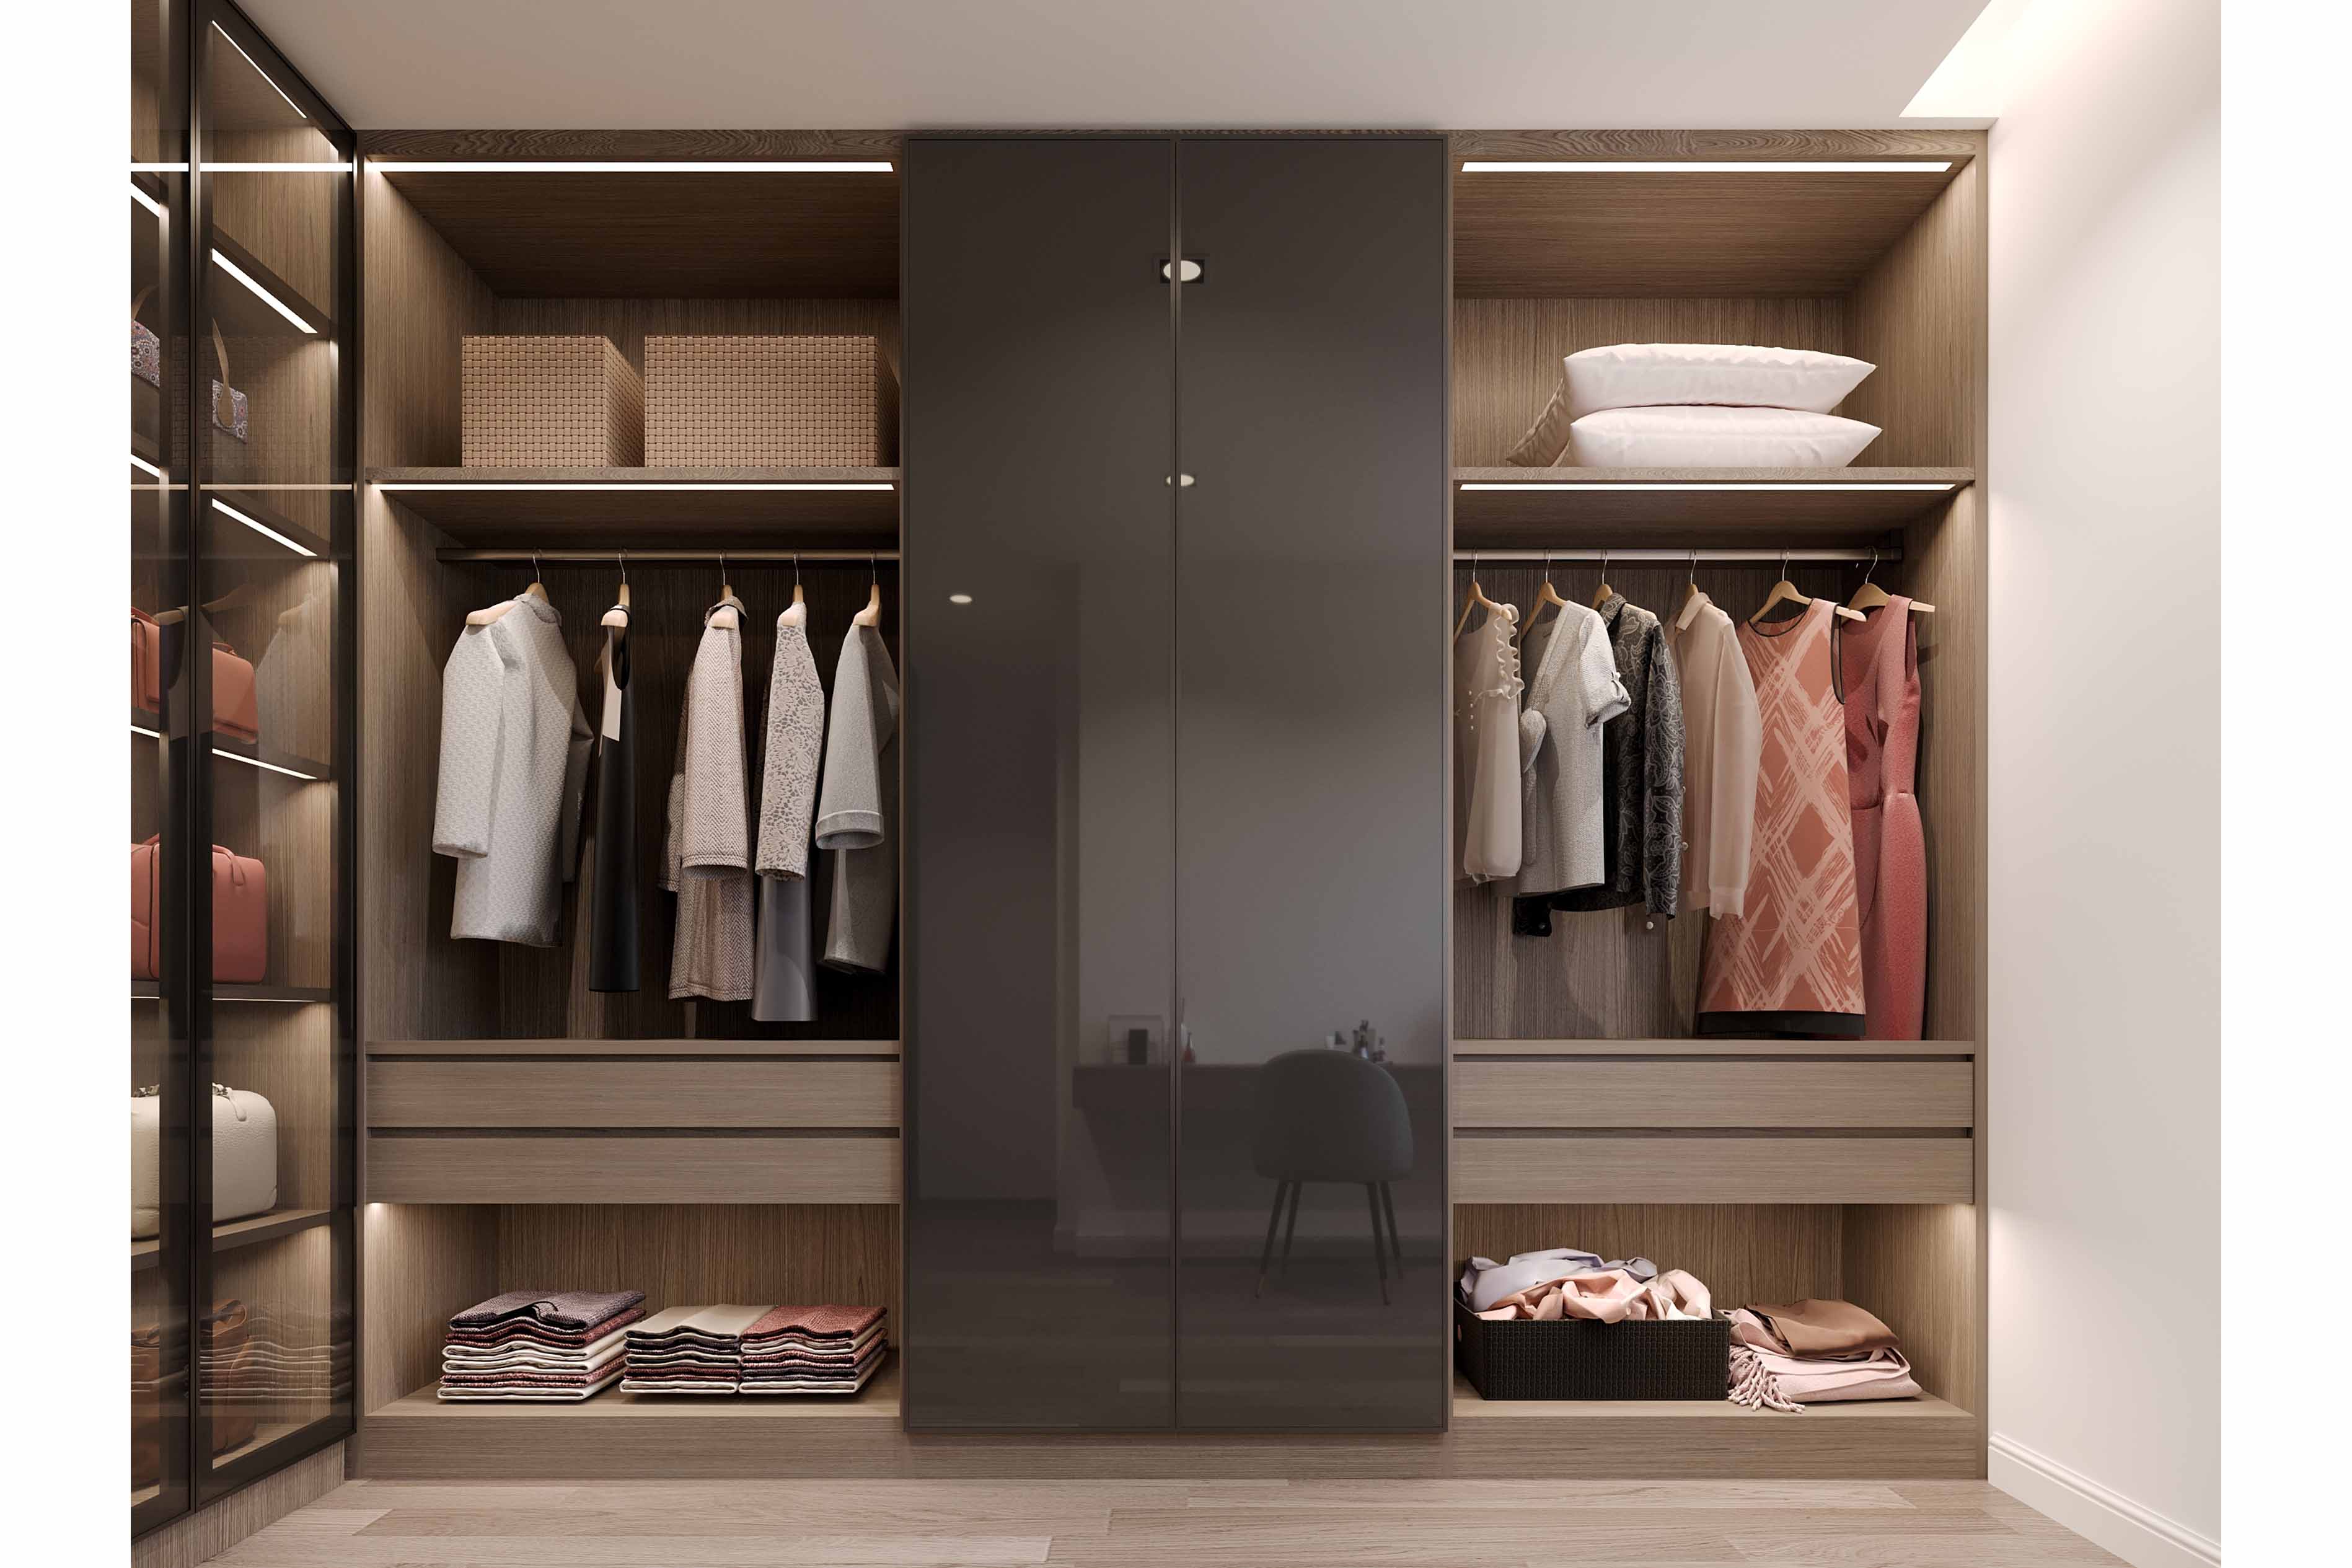 003. Bespoke fitted wardrobes his hers dressing room mylands farrow and ball armac martin glass doorless hanging en suite near Guildford Surrey